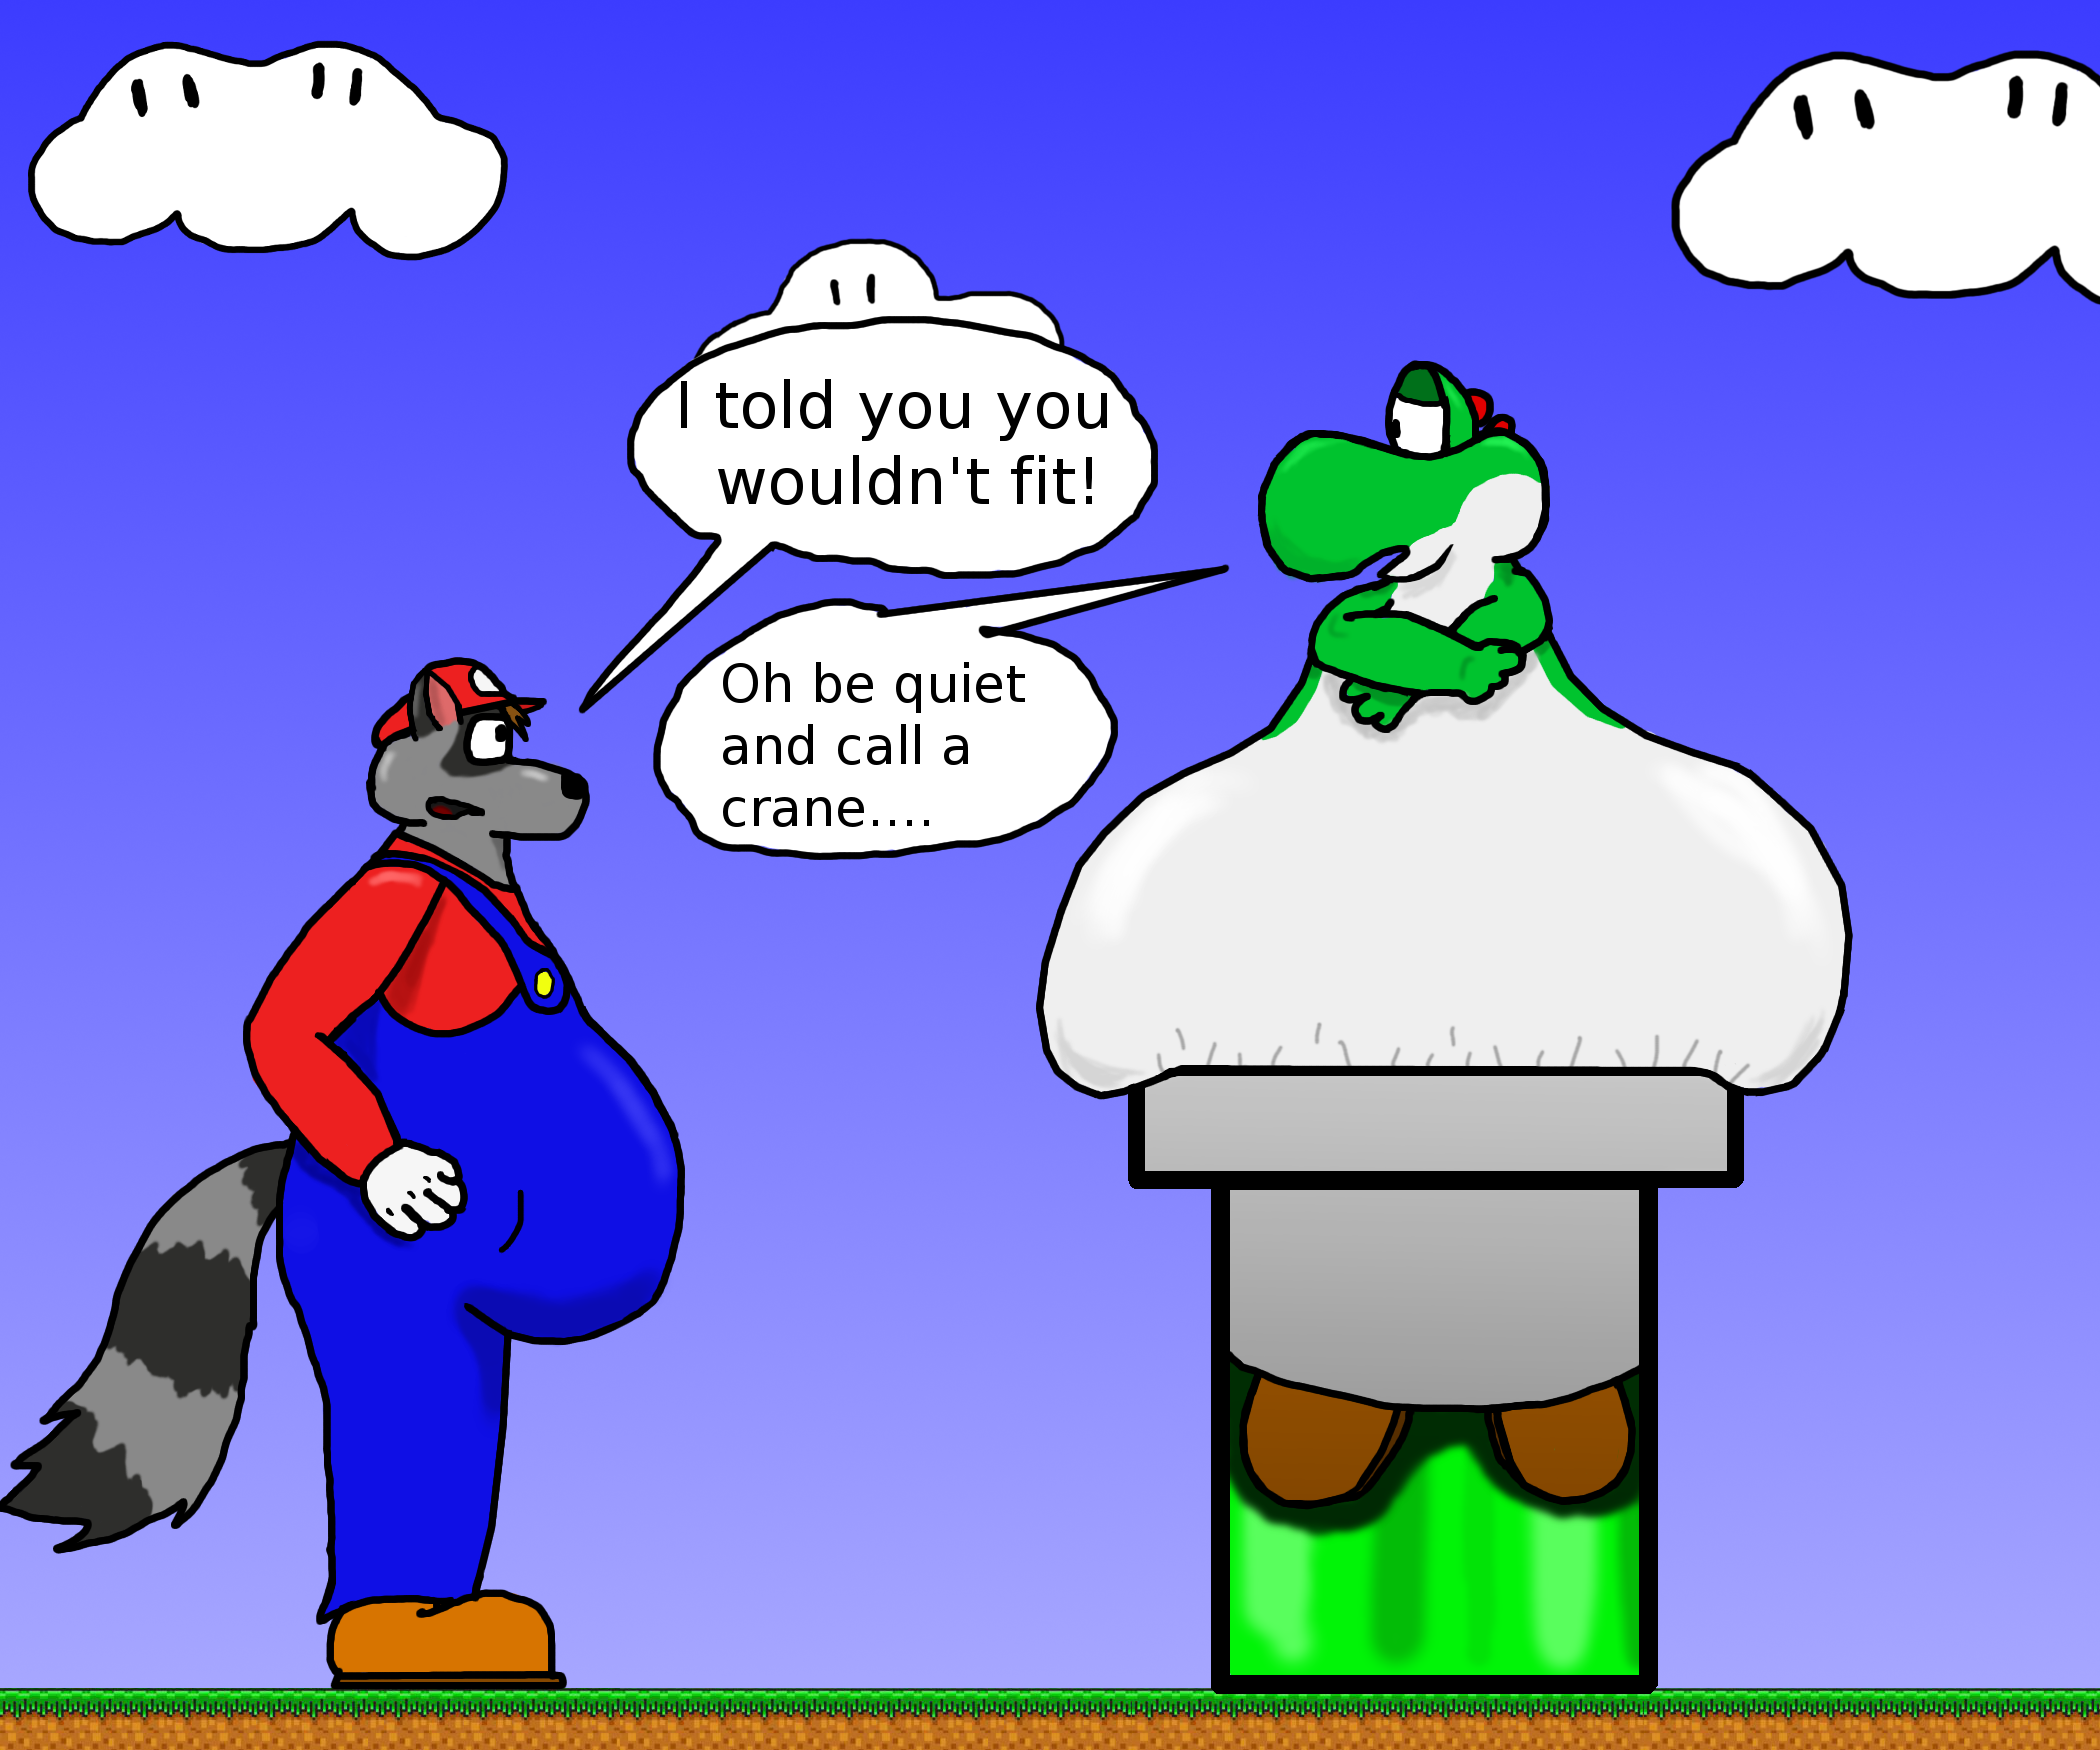 Yoshi Doesnt Fit By Frank Raccoon On DeviantArt.